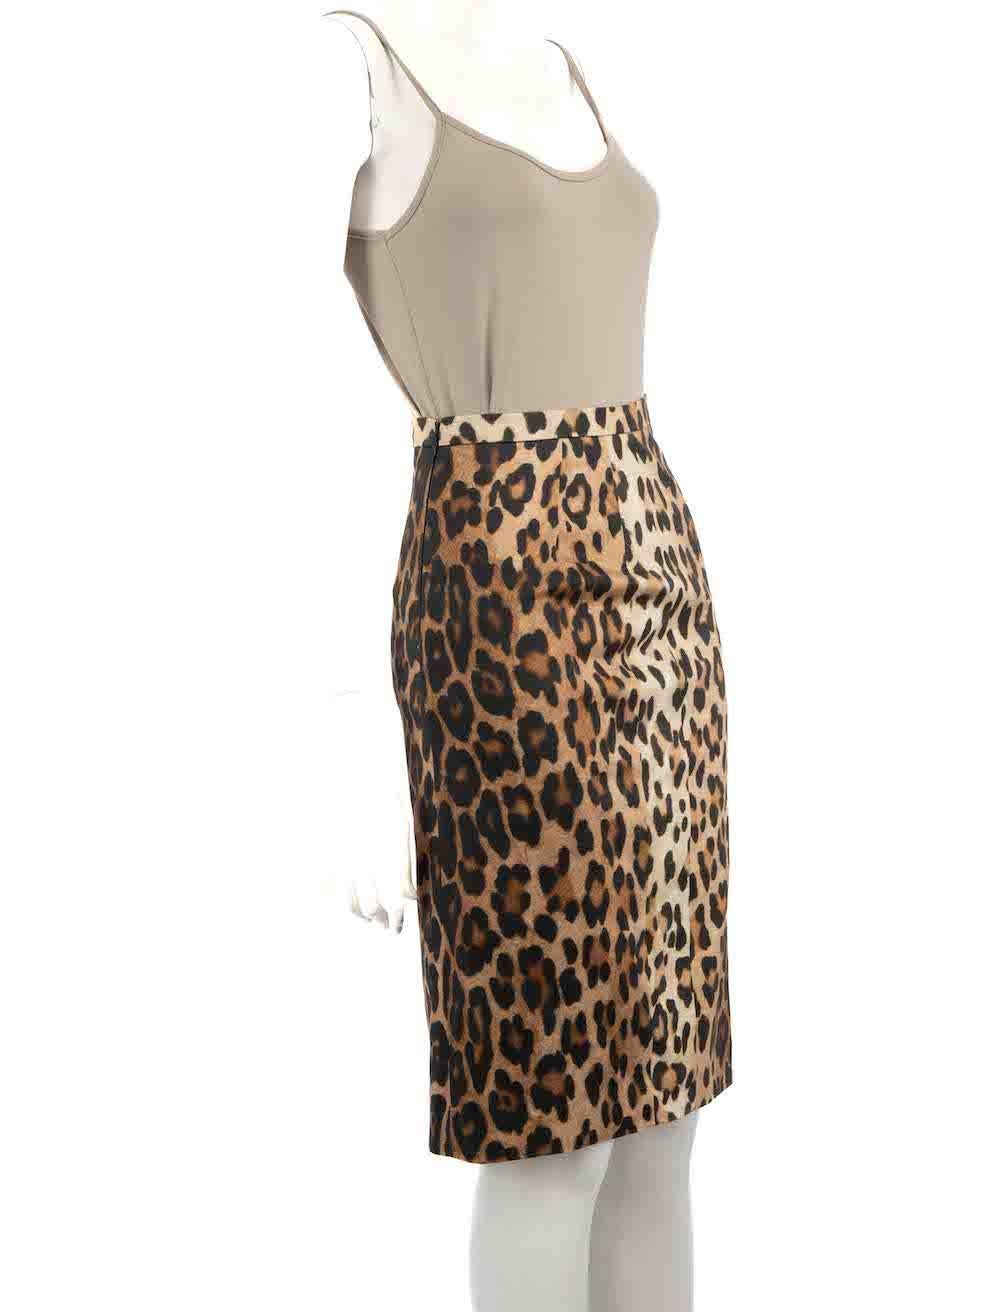 CONDITION is Very good. Hardly any visible wear to skirt is evident on this used Altuzarradesigner resale item.
 
 Details
 Brown
 Cotton
 Skirt
 Leopard print
 Knee length
 Figure hugging fit
 Back zip and hook fastening
 
 Made in Italy
 
